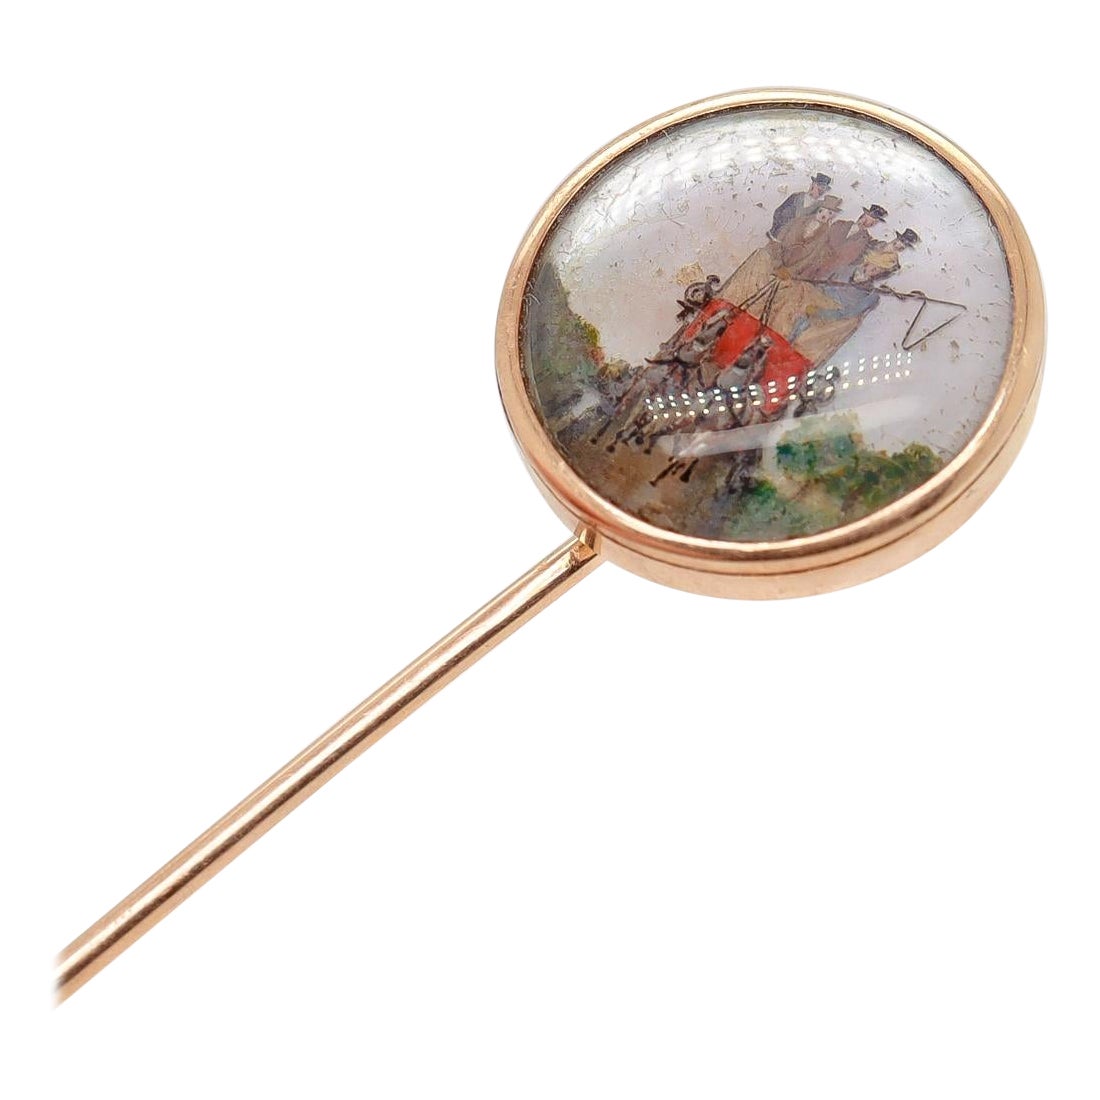 Large Antique Signed 14k Gold Essex Crystal Stickpin of a Stagecoach or Carriage